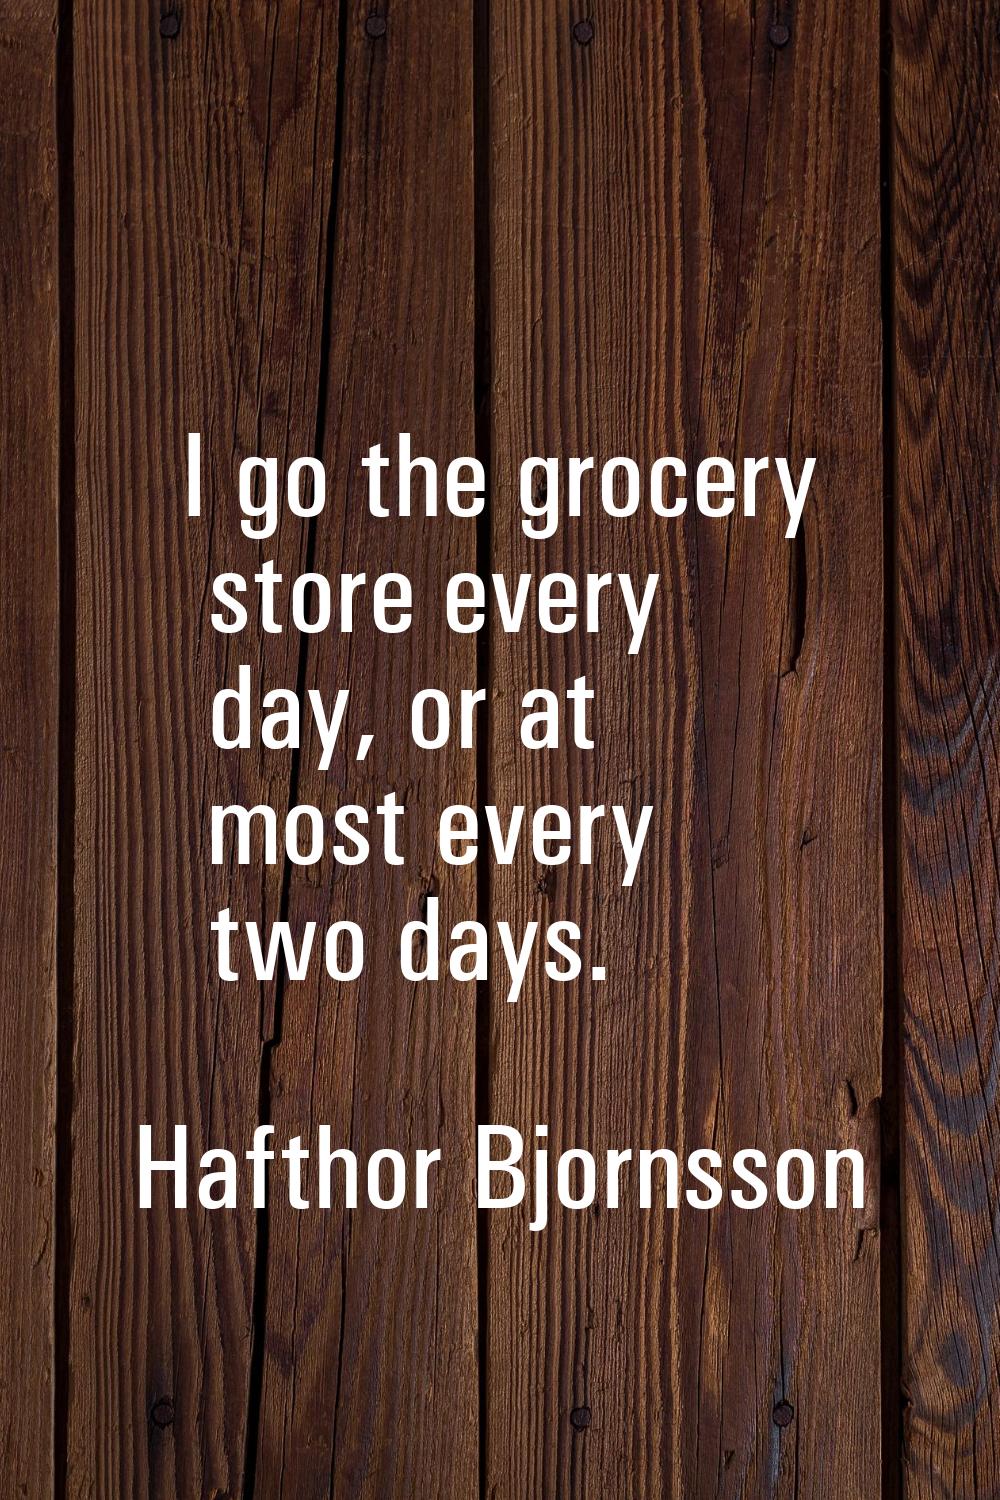 I go the grocery store every day, or at most every two days.